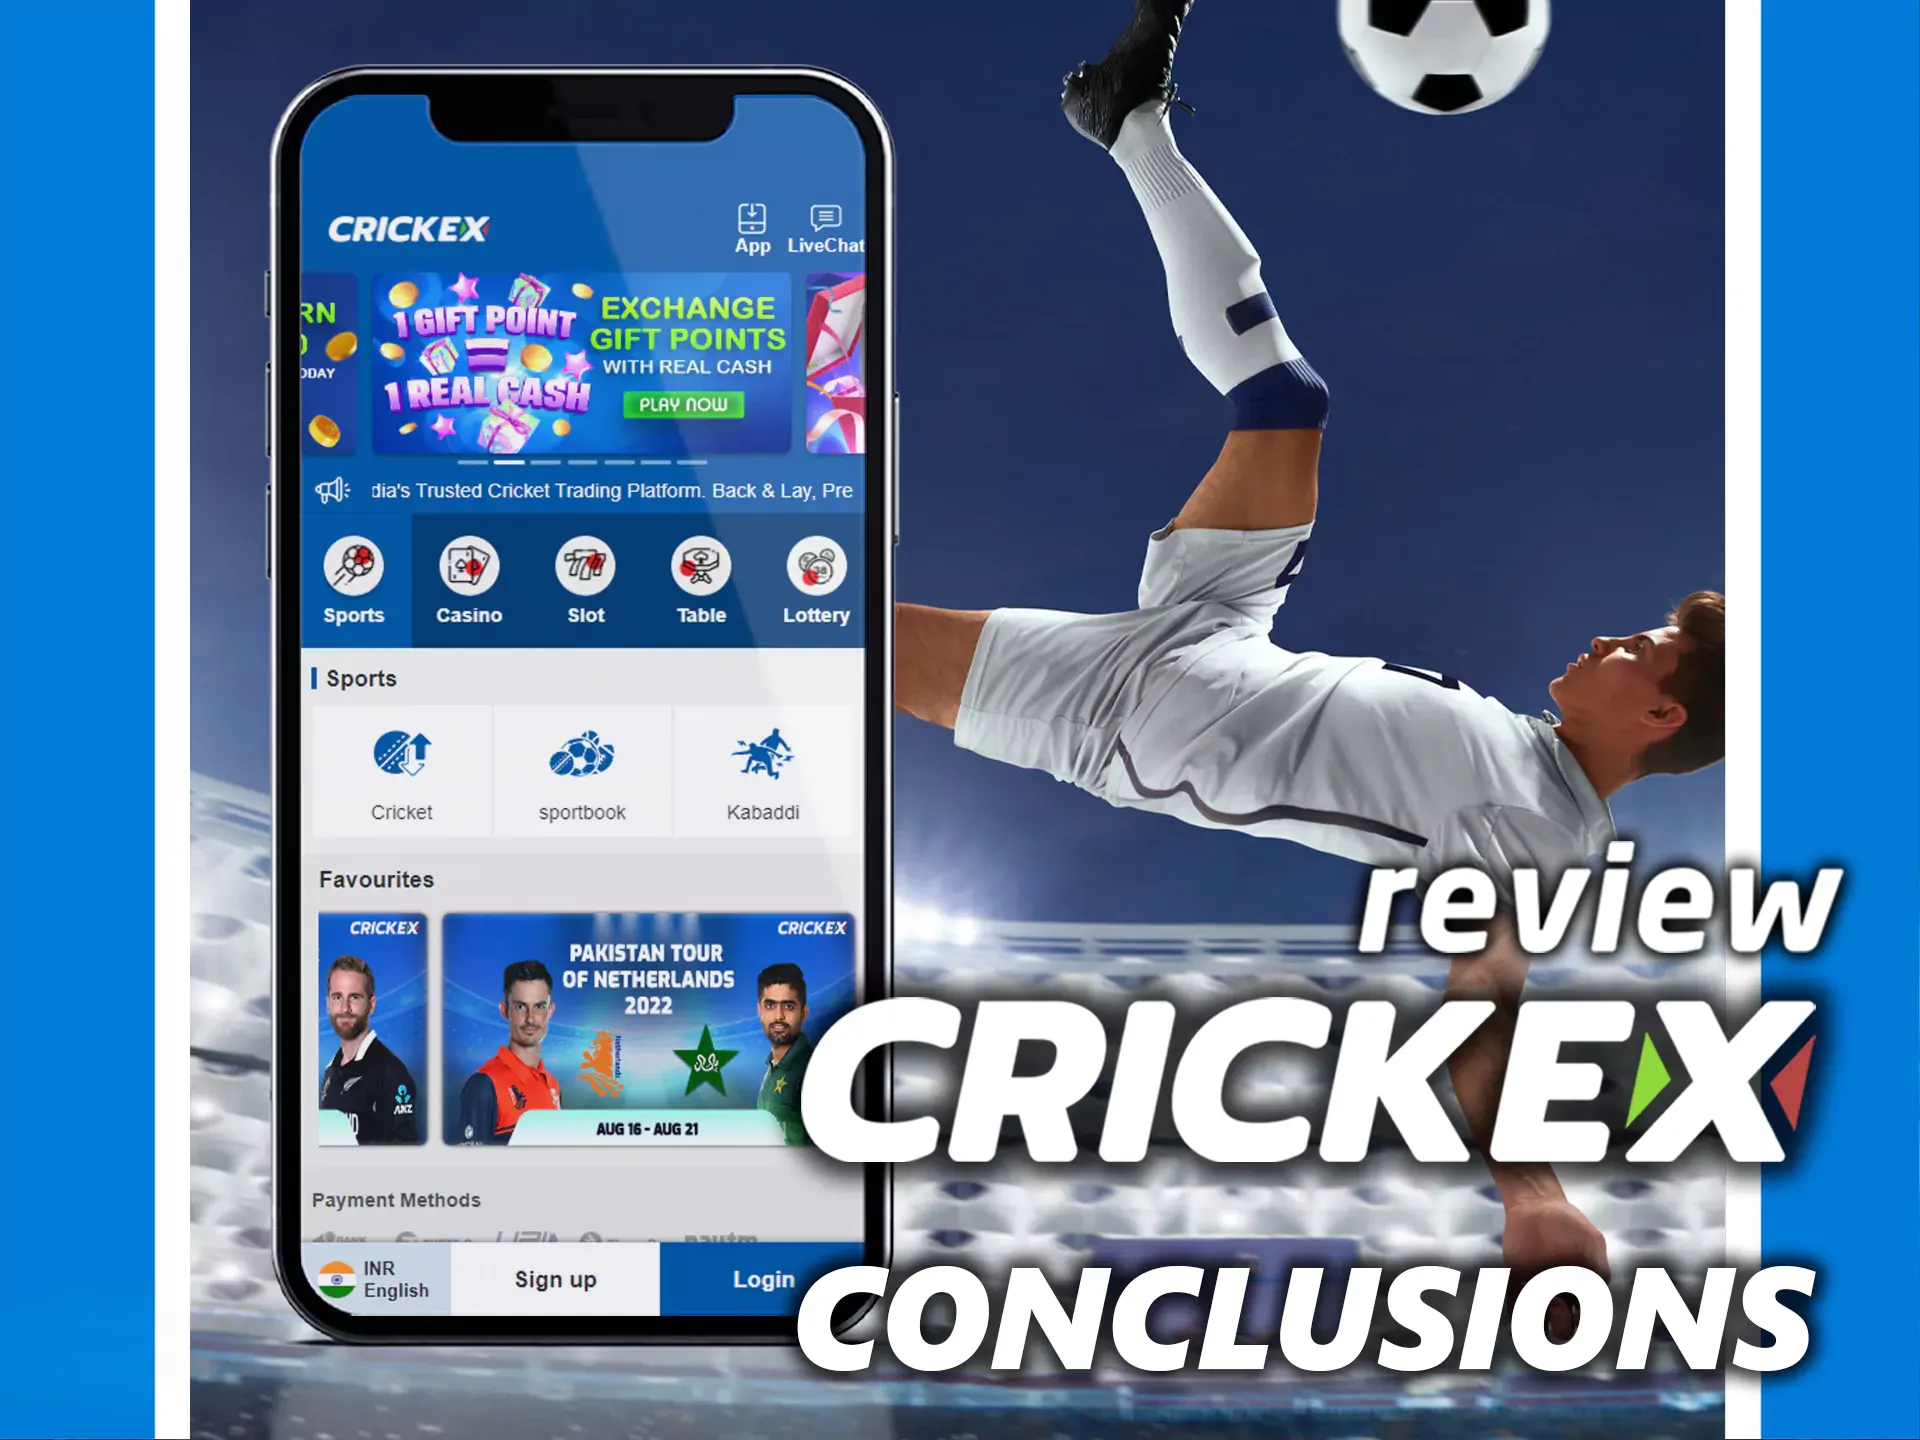 The Crickex app is great for online sports betting.